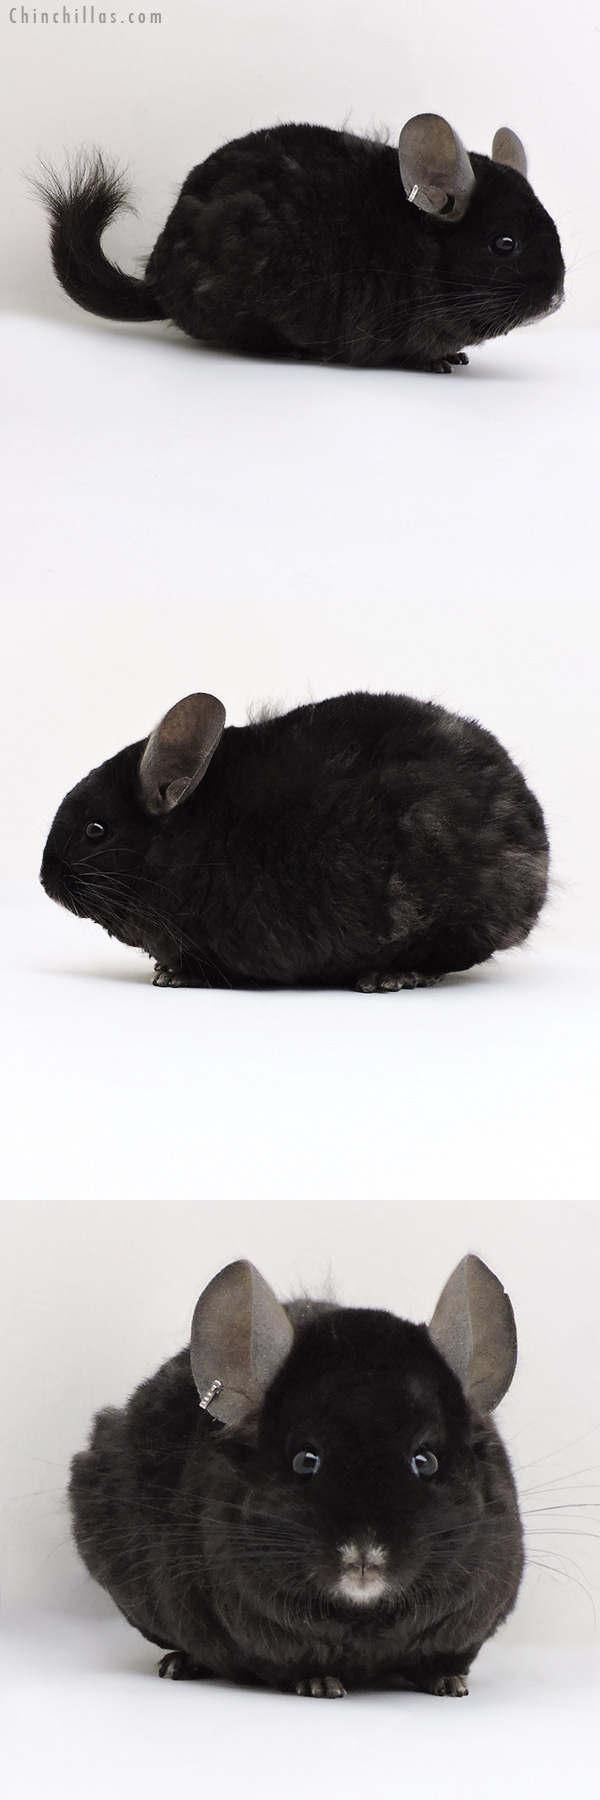 Chinchilla or related item offered for sale or export on Chinchillas.com - 18139 Large Exceptional Ebony  Royal Persian Angora ( Locken Carrier ) Female Chinchilla